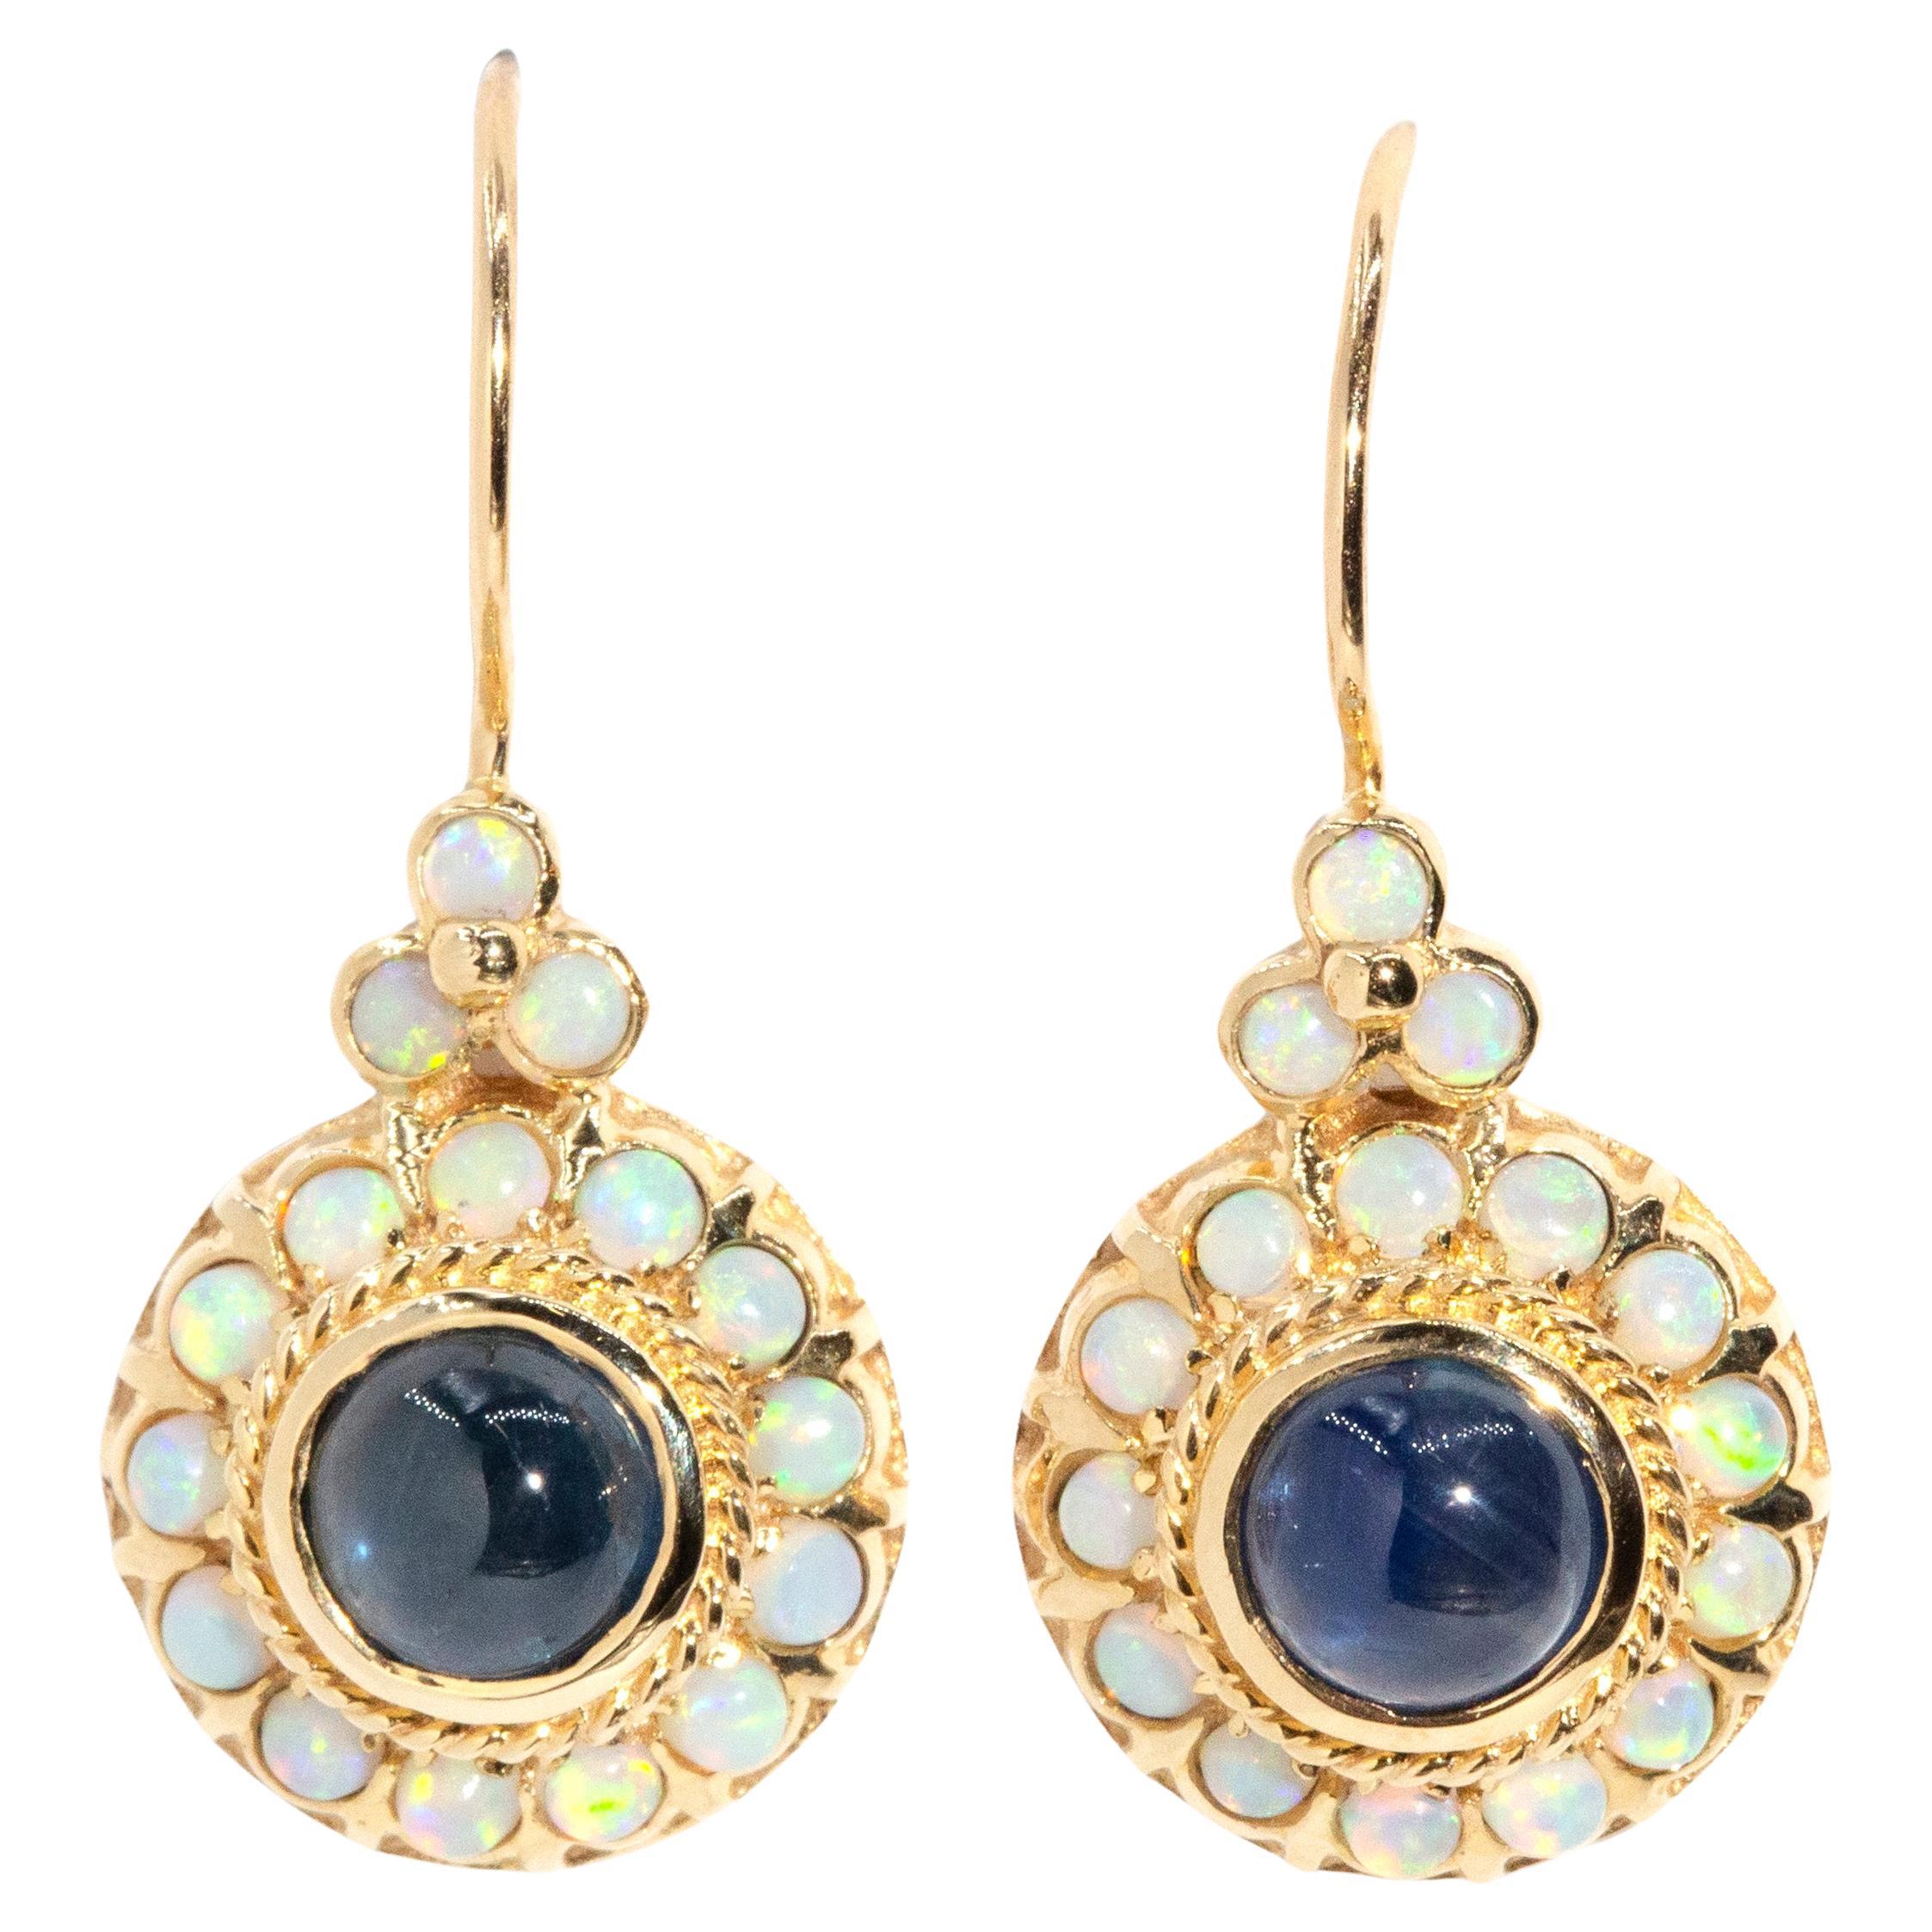 Vintage Inspired Sapphire Cabochon & Opal Drop Earrings 9 Carat Yellow Gold